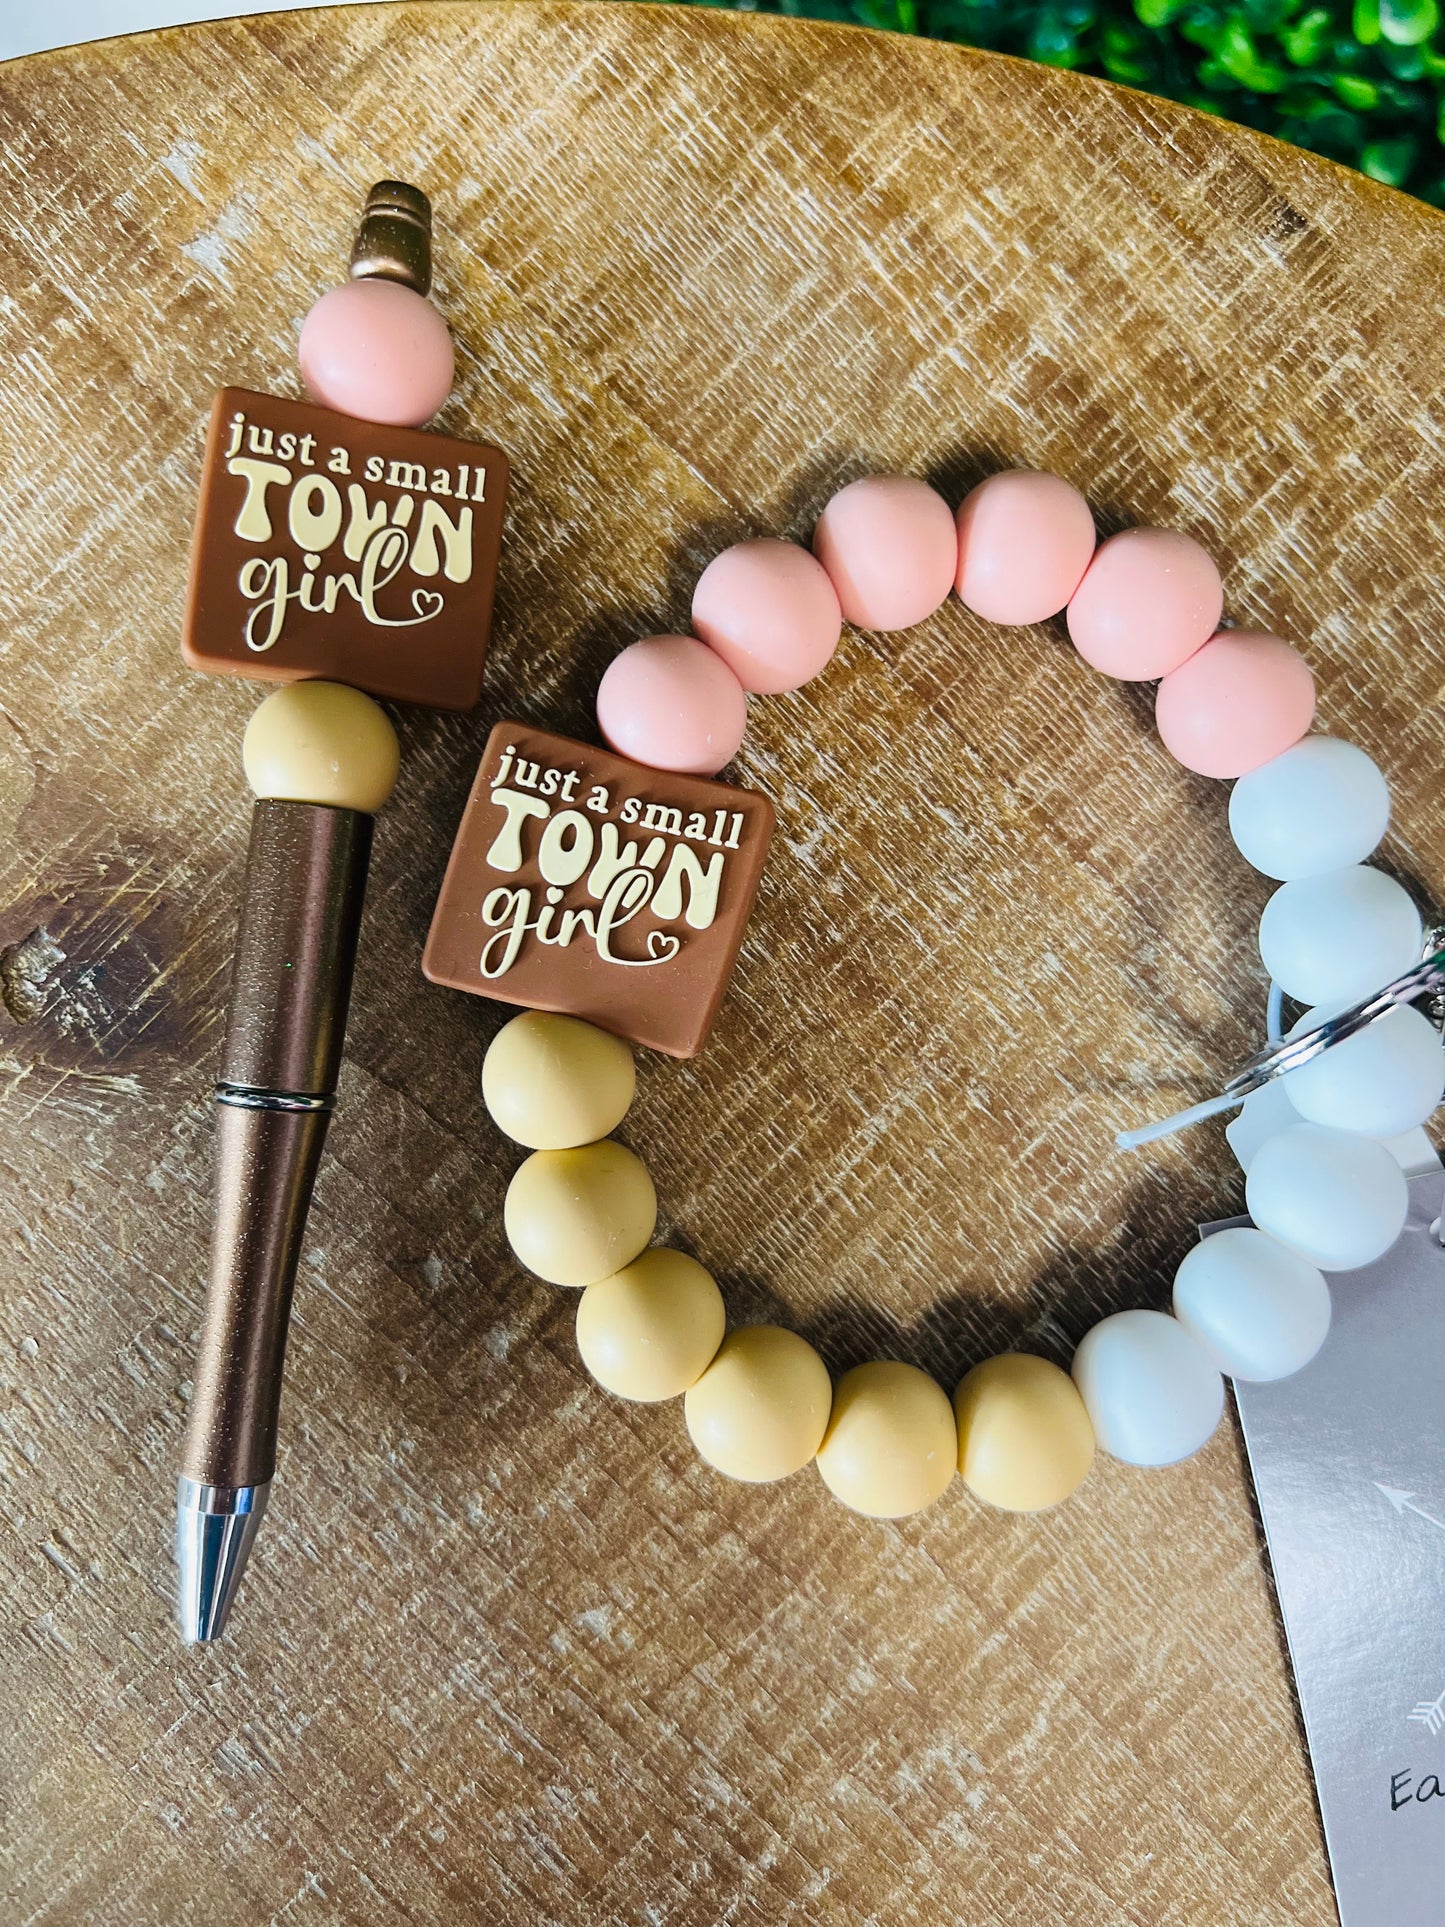 Just A Small Town Girl Beaded Pen